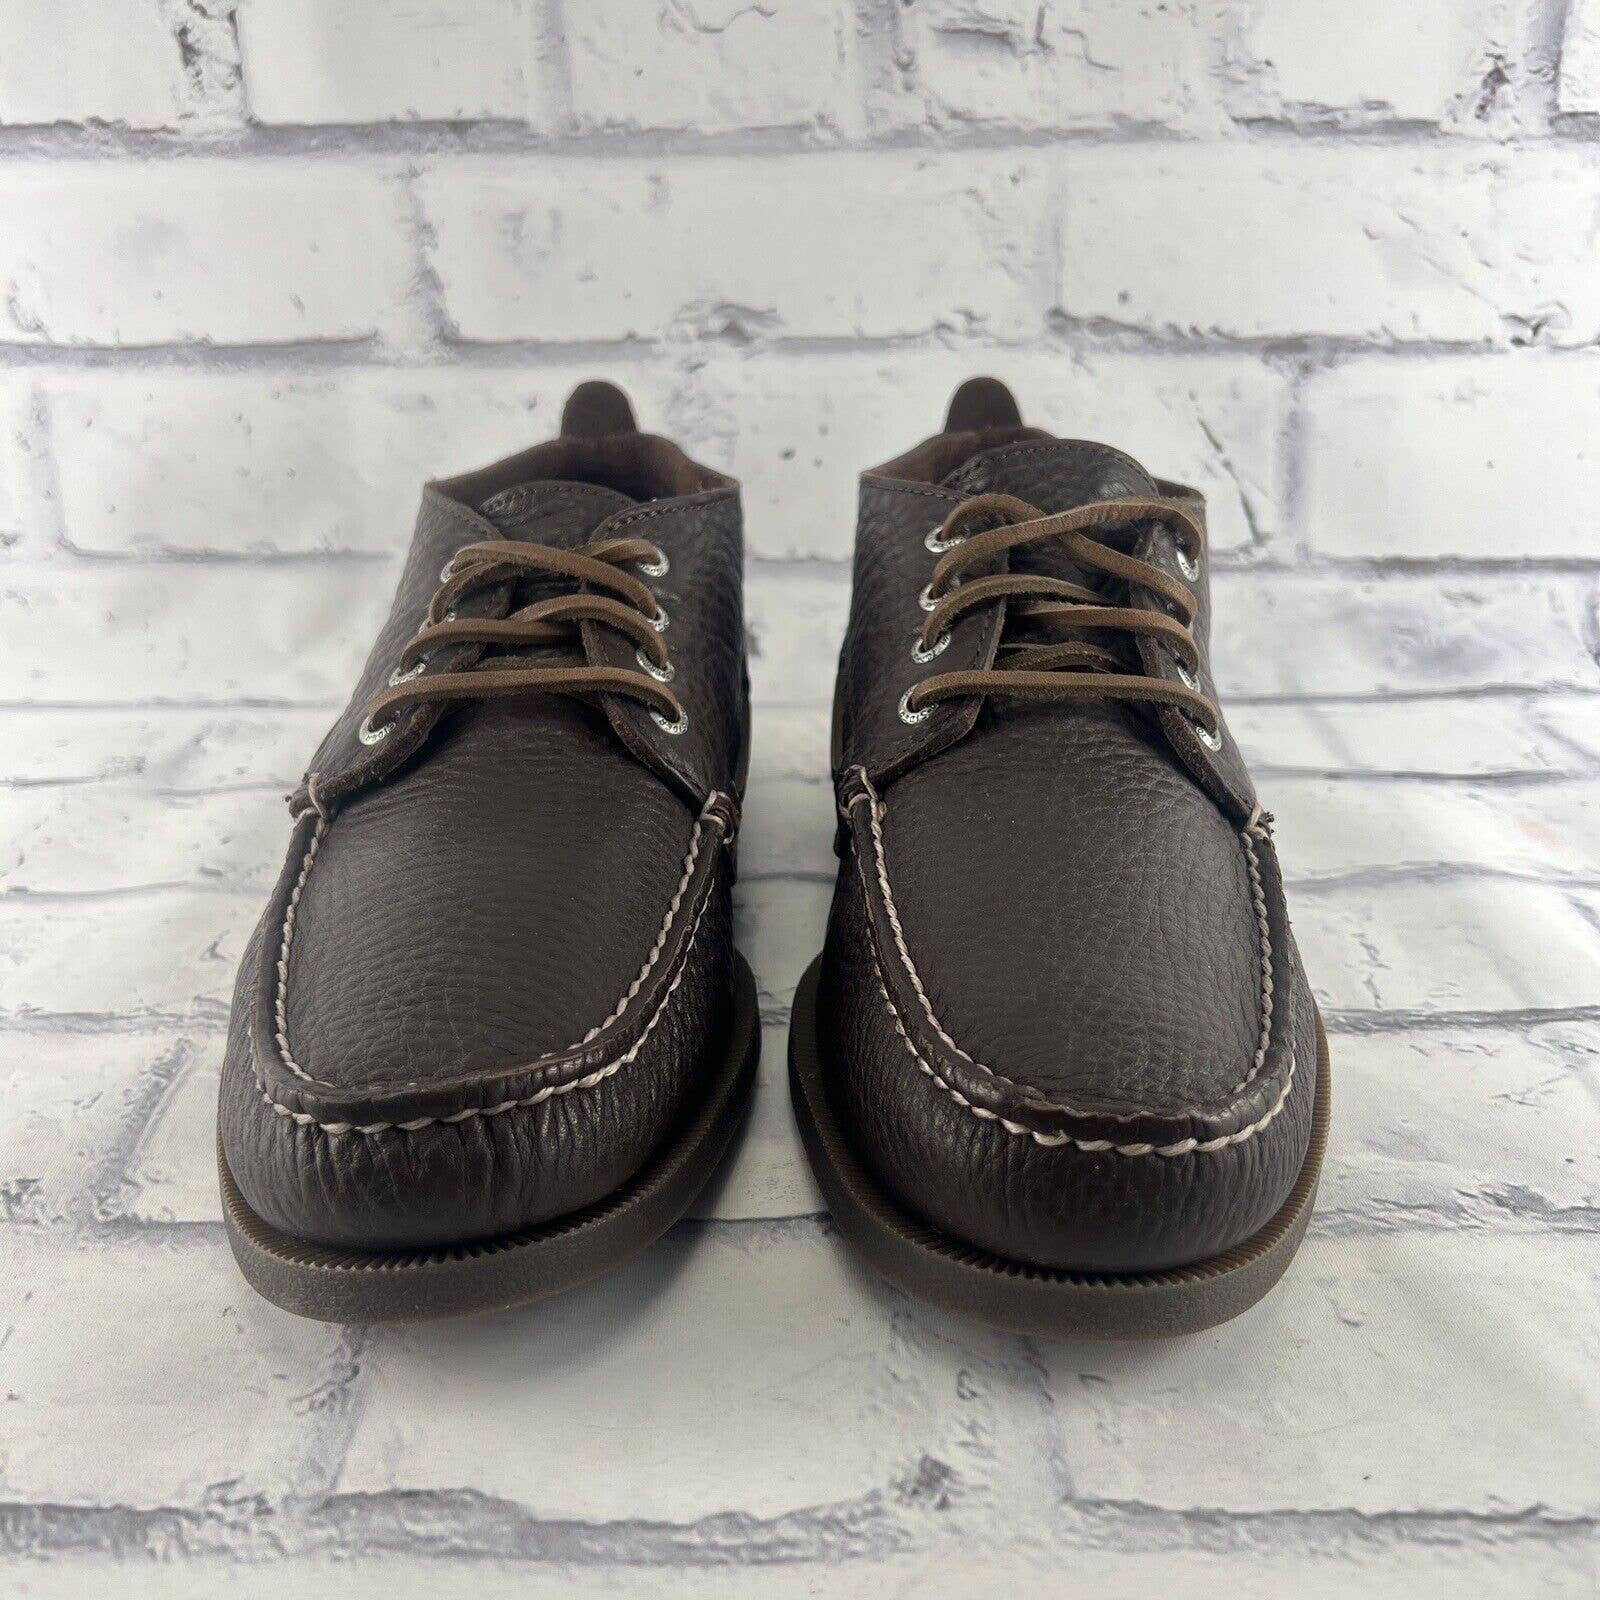 Sperry Top Sider Chukka Boots Mens 10.5 M Pebbled Leather Chocolate Brown